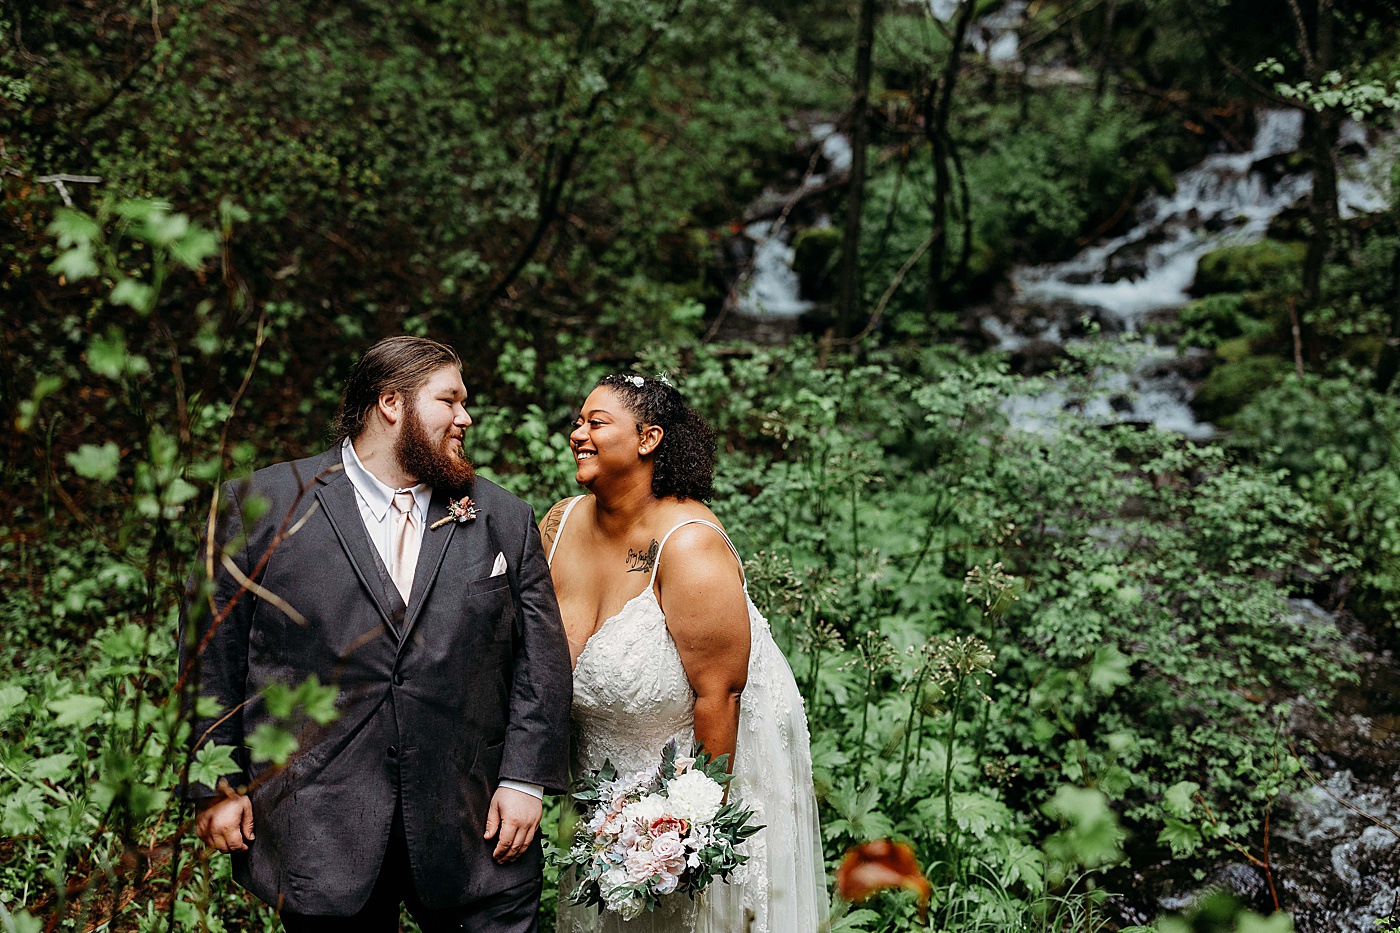 Bride and groom portraits | Photo by Megan Montalvo Photography